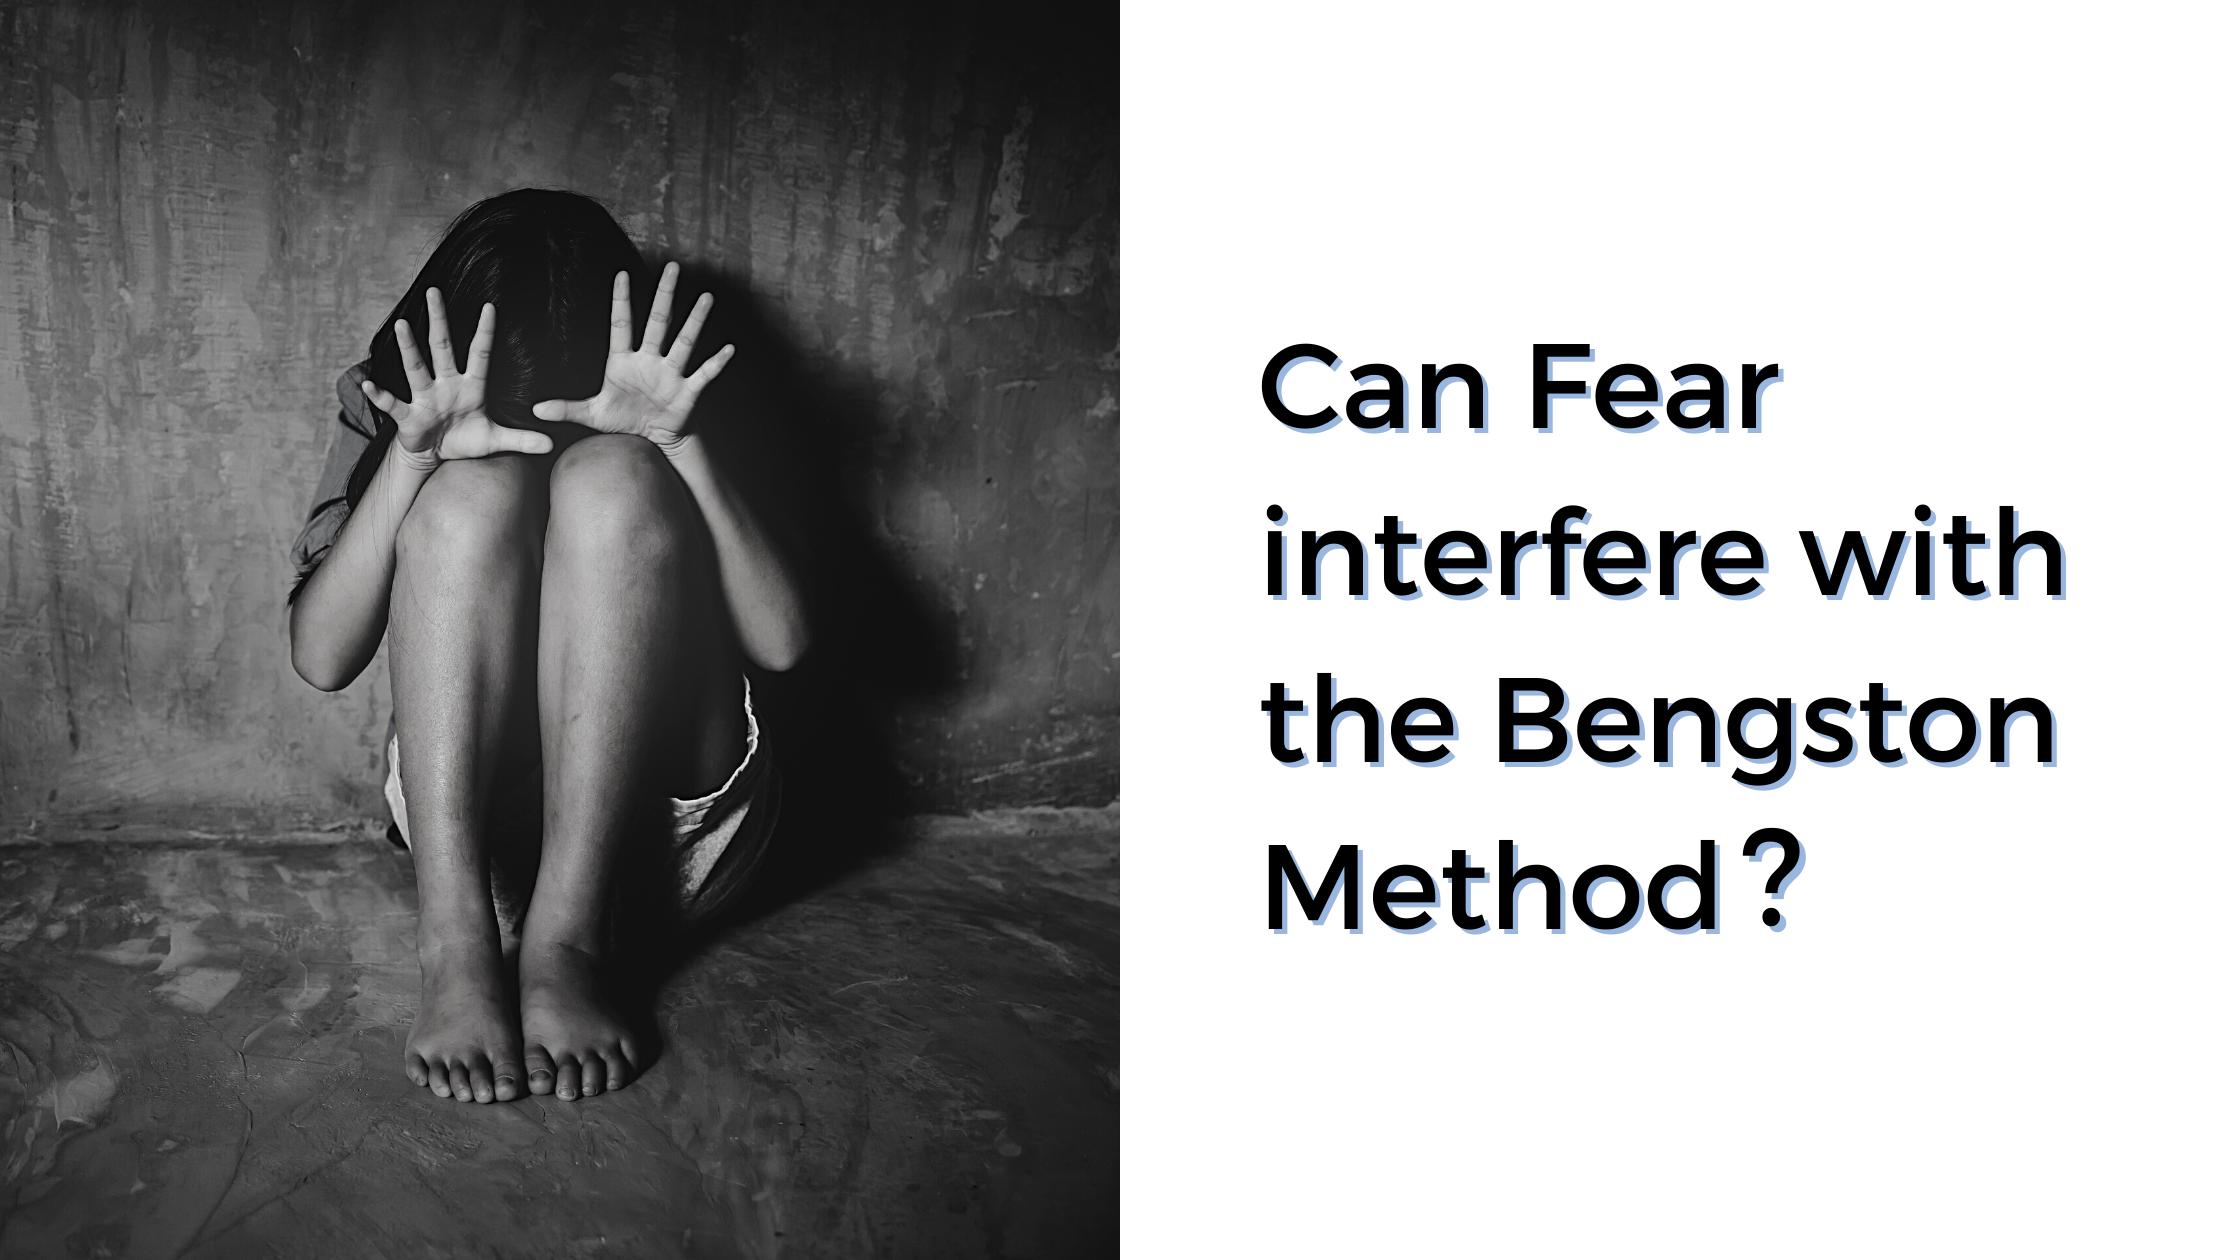 Can Fear interfere with the Bengston Method?